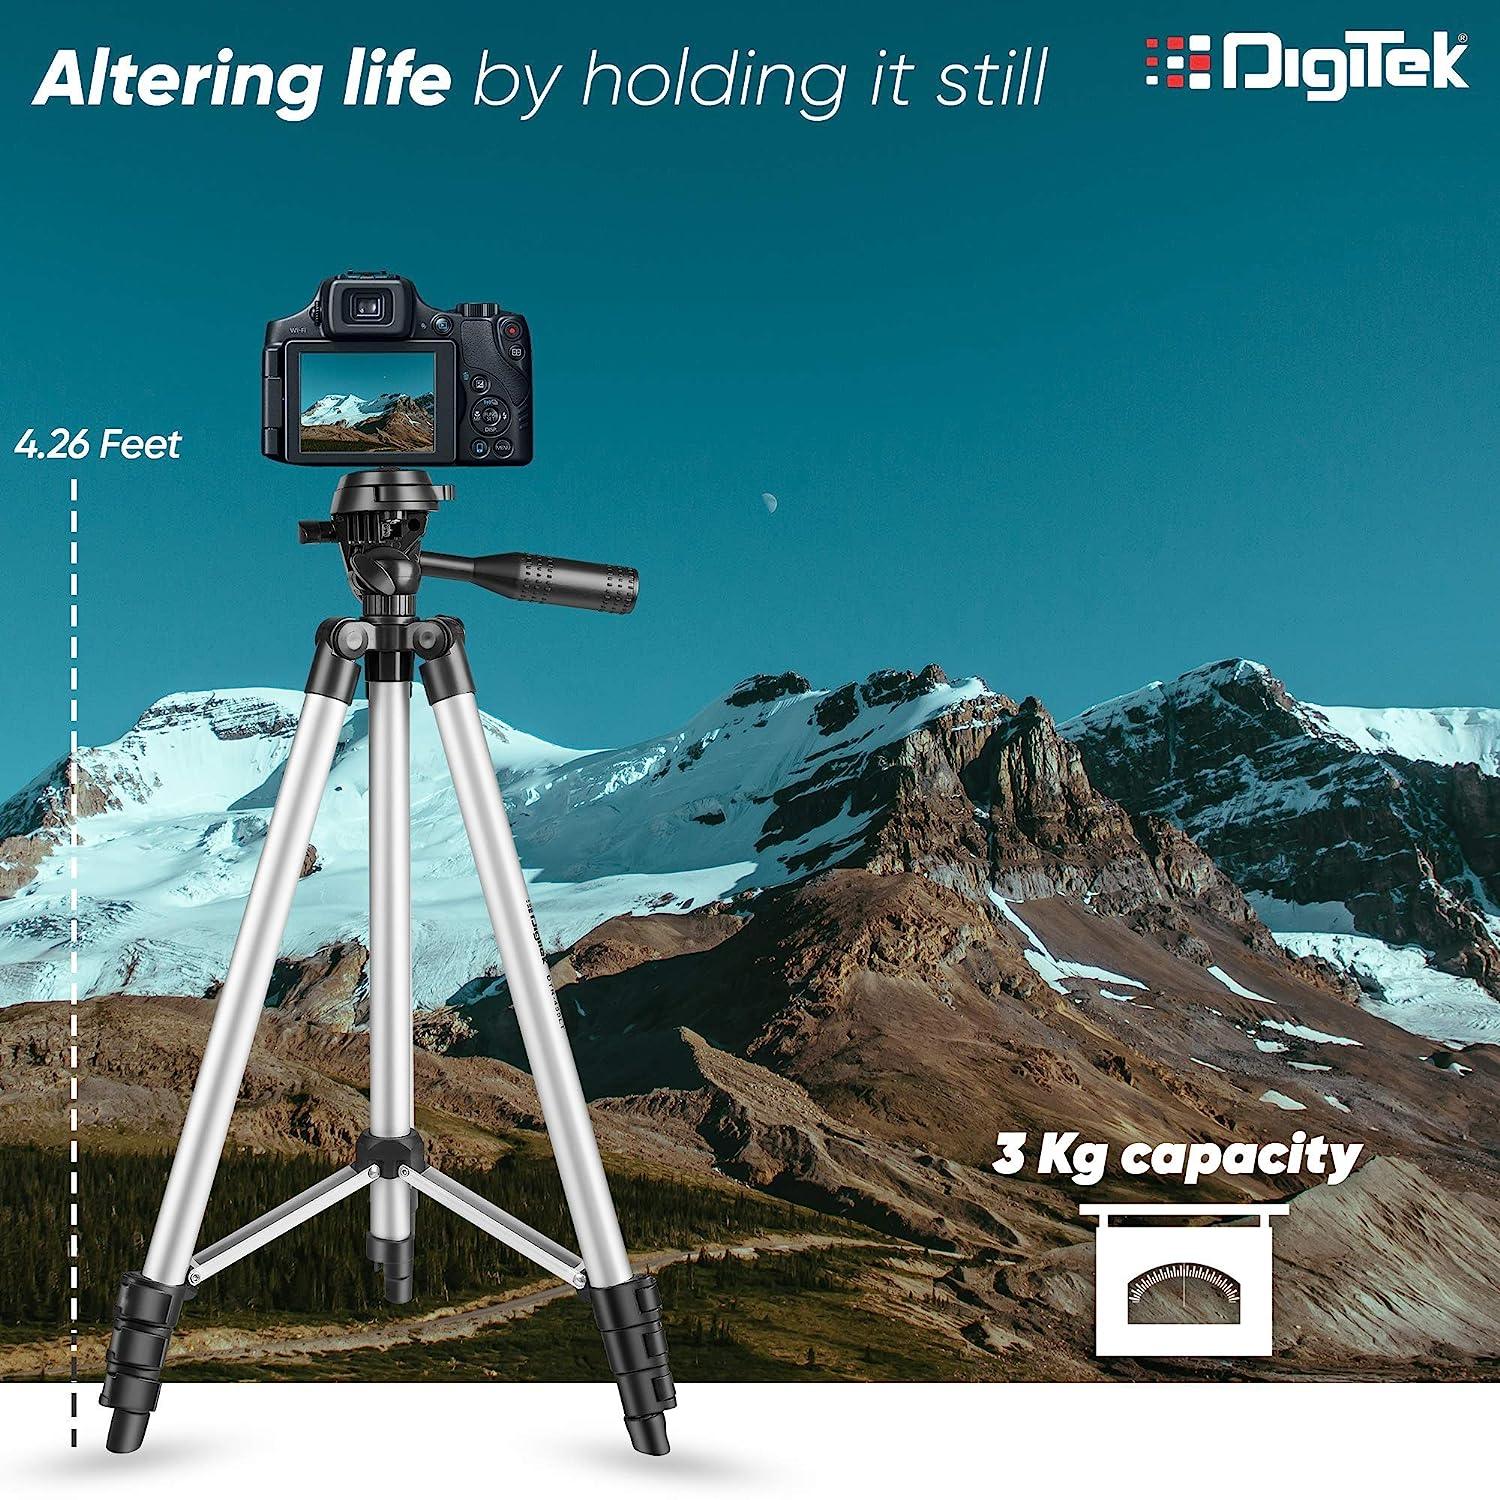 Digitek (DTR 455 LT) (51 Inch) Tripod for Smartphones & Cameras with Mobile Holder and Carry Bag, Max Operating Height - 4.26 Feet, Load Capacity-3 Kg, Lightweight & Sturdy Tripod with Adjustable 3 Way Pan Head - Digitek